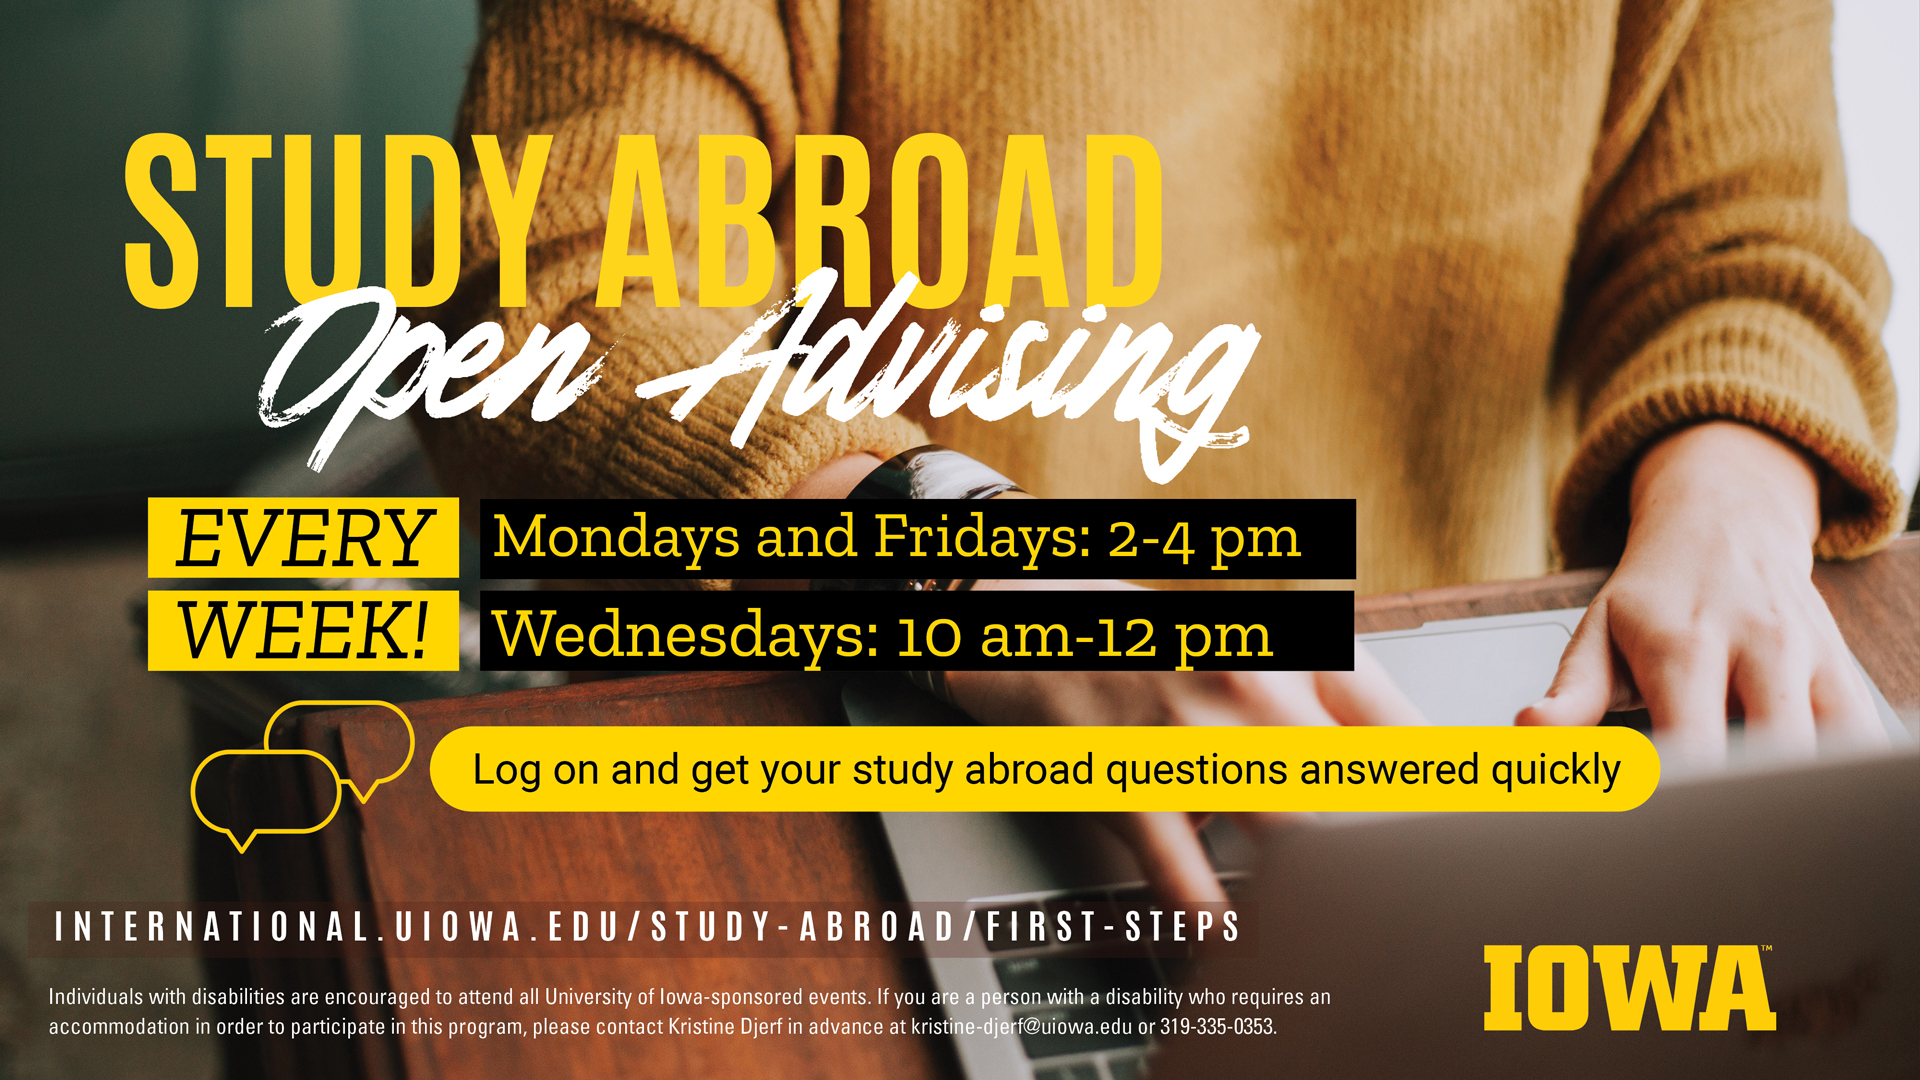  Study Abroad offers weekly Open Advising hours every Monday, Wednesday, and Friday so you can get your questions answered quickly.        Mondays and Fridays from 2:00 - 4:00 p.m.    Wednesdays from 10:00 a.m. - 12:00 p.m.        International.uiowa.edu/study-abroad/first-steps        Individuals with disabilities are encouraged to attend all University of Iowa–sponsored events. If you are a person with a disability who requires a reasonable accommodation in order to participate in this program, please contact Kristine Djerf in advance at 319-335-0353 or kristine-djerf@uiowa.edu.